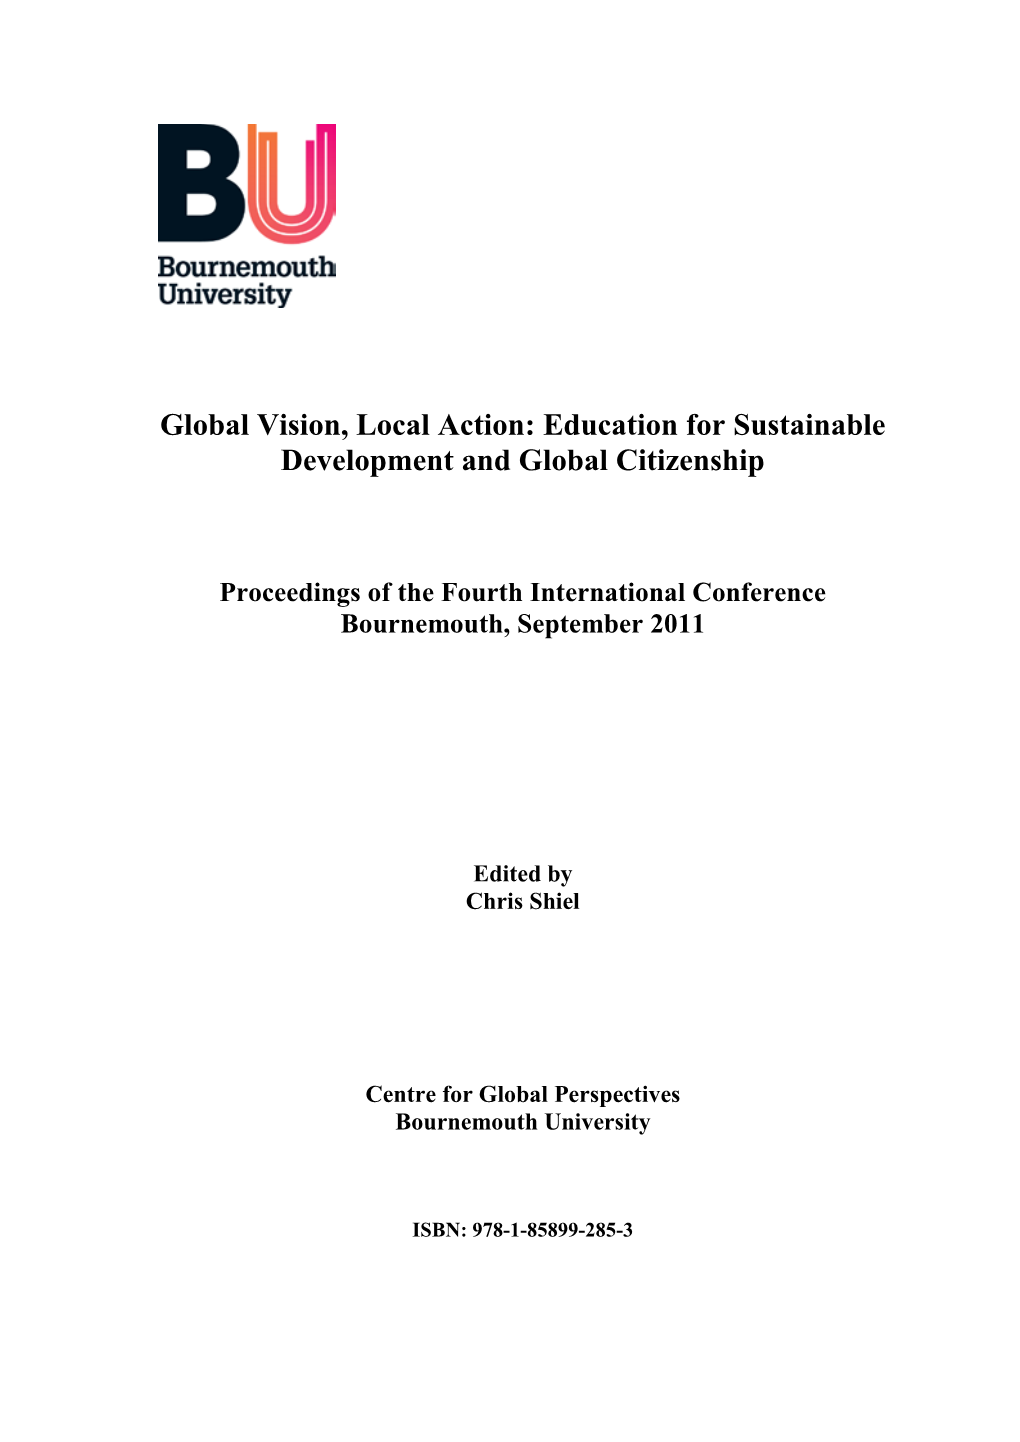 Global Vision, Local Action: Education for Sustainable Development and Global Citizenship